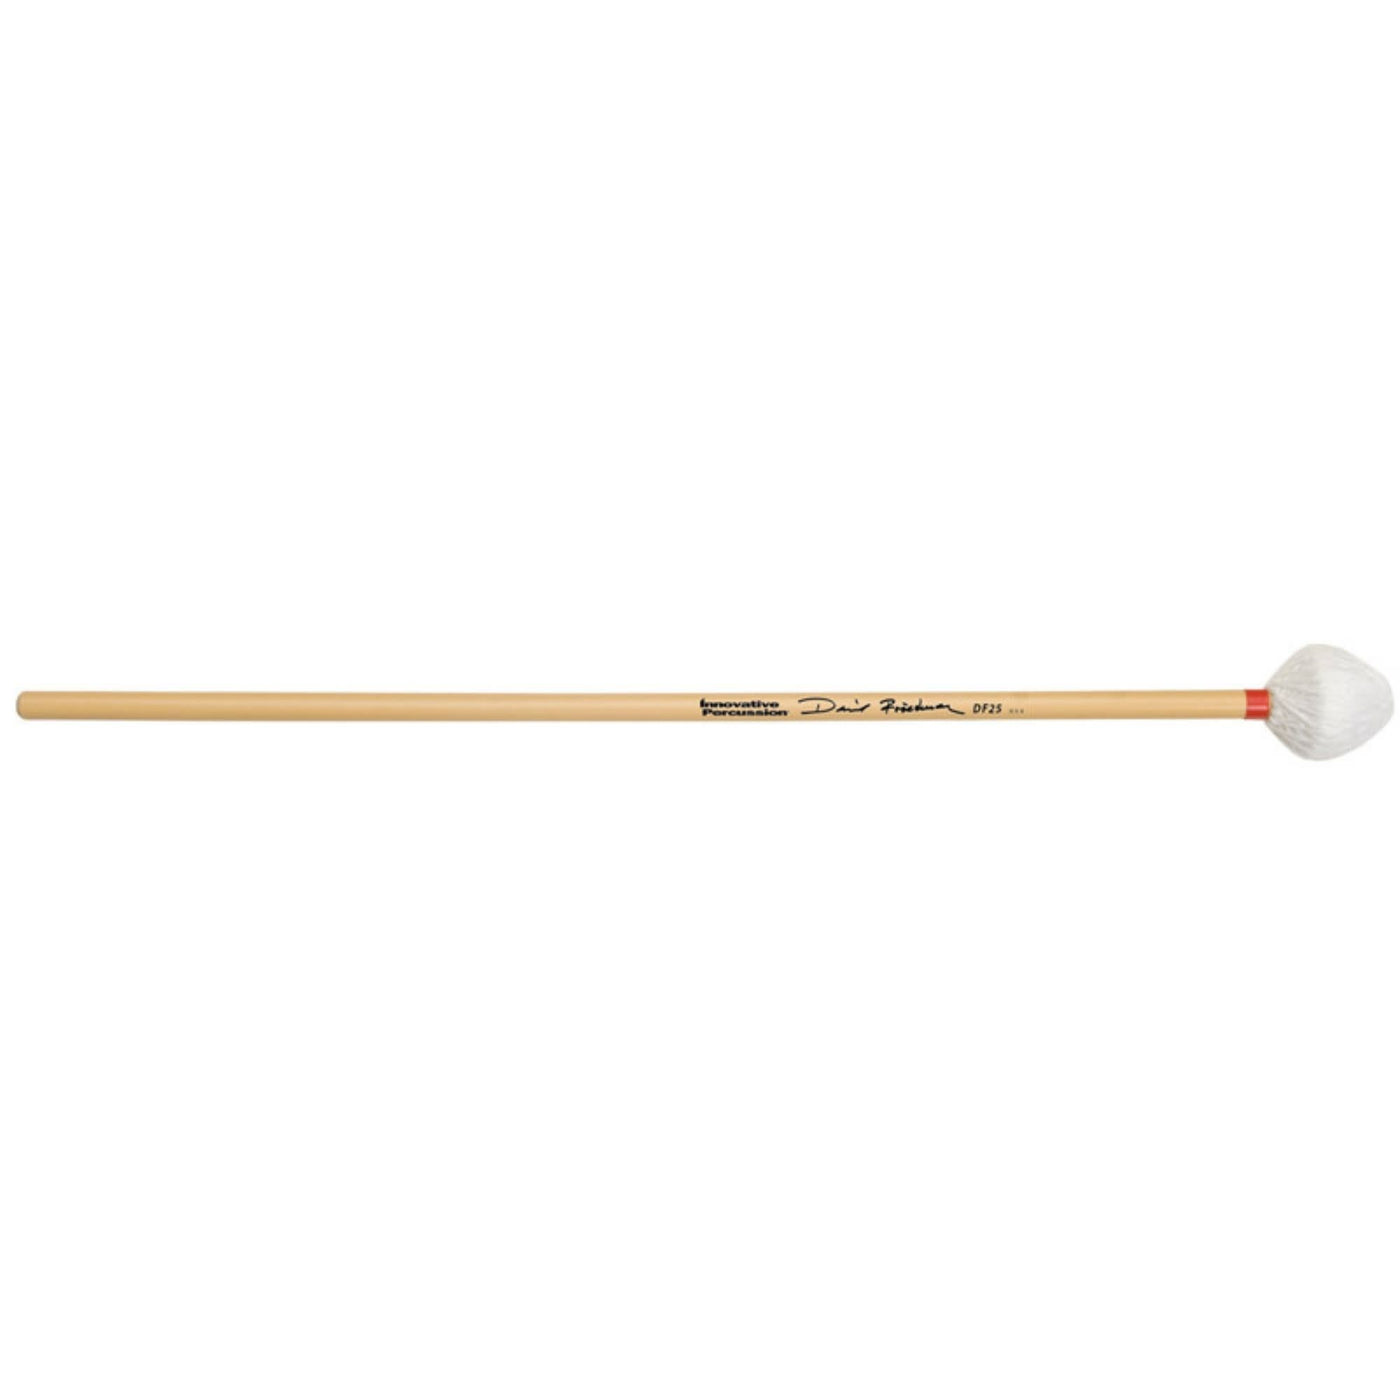 Innovative Percussion DF25 Keyboard Mallet